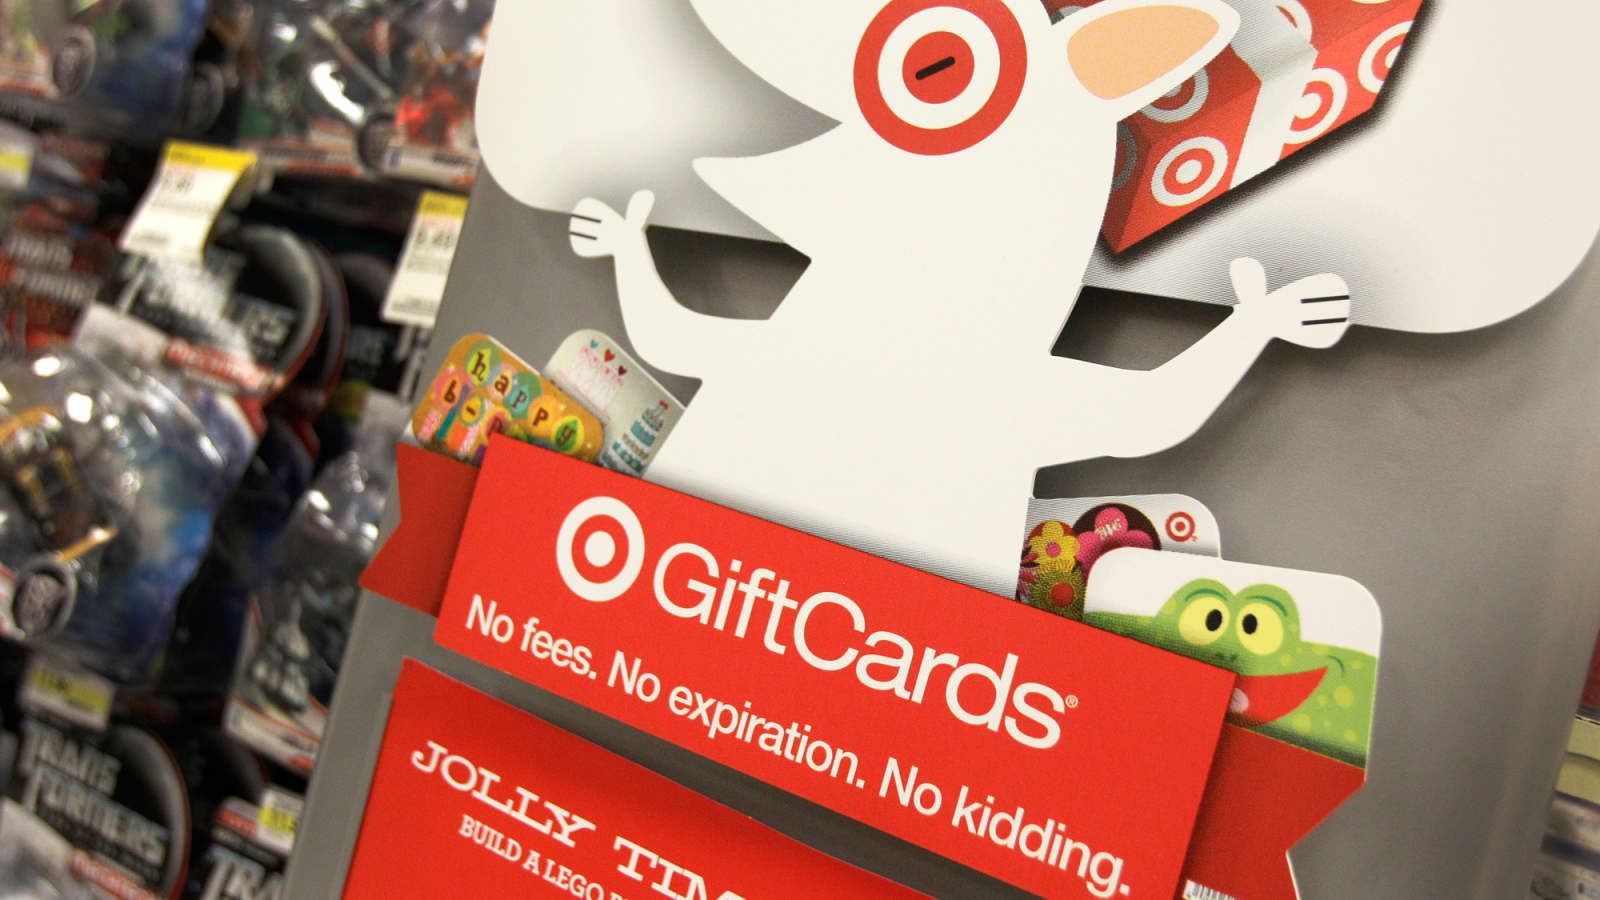 DO NOT Throw Away Your Empty Gift Cards After Shopping—Here's Why